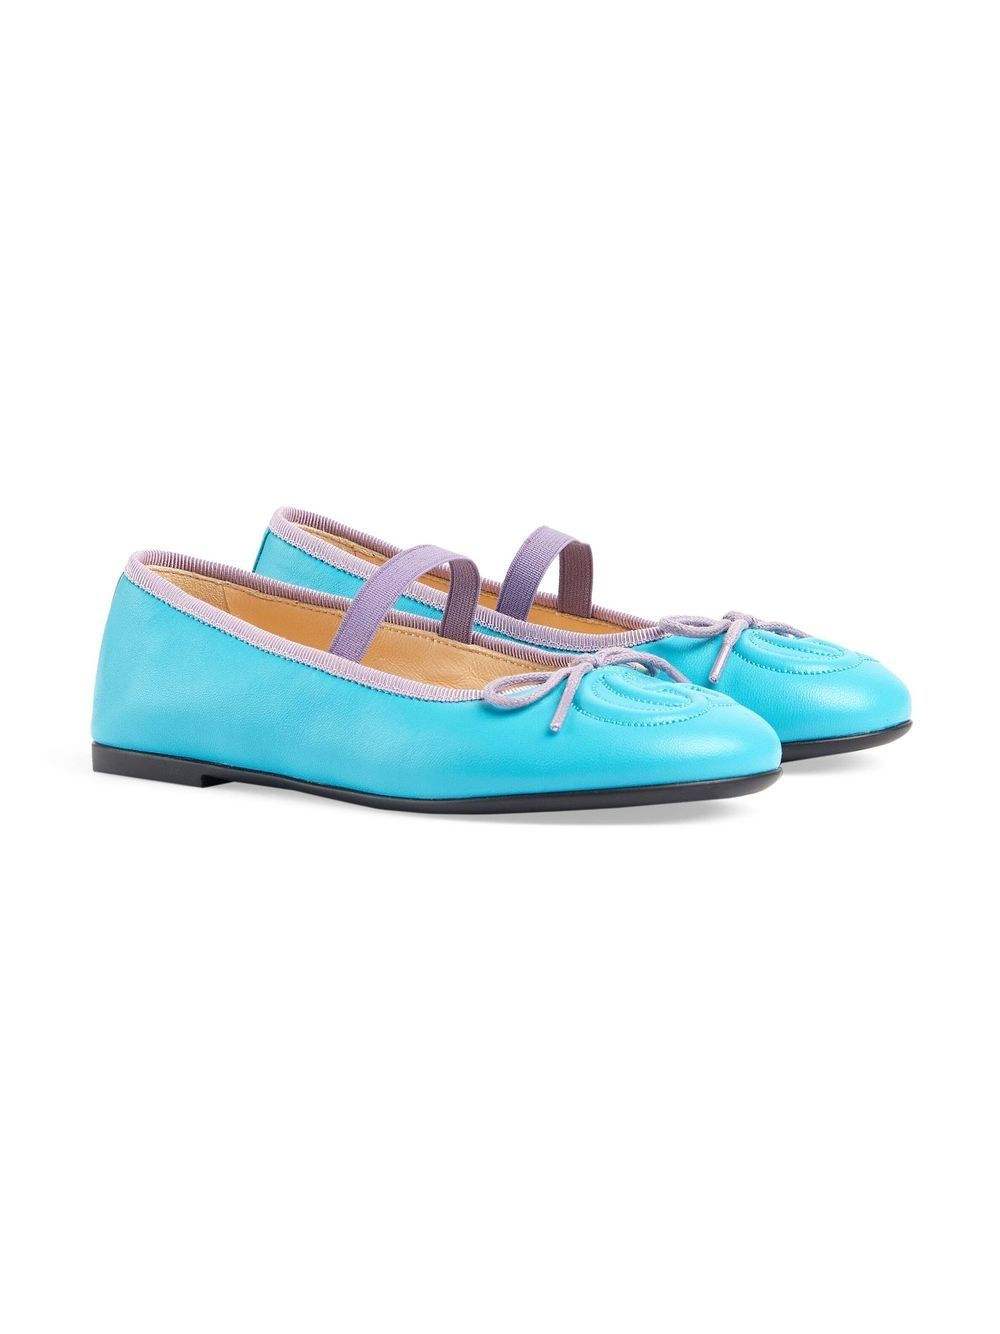 Gucci Kids' Interlocking-g Leather Ballet Shoes In Blue